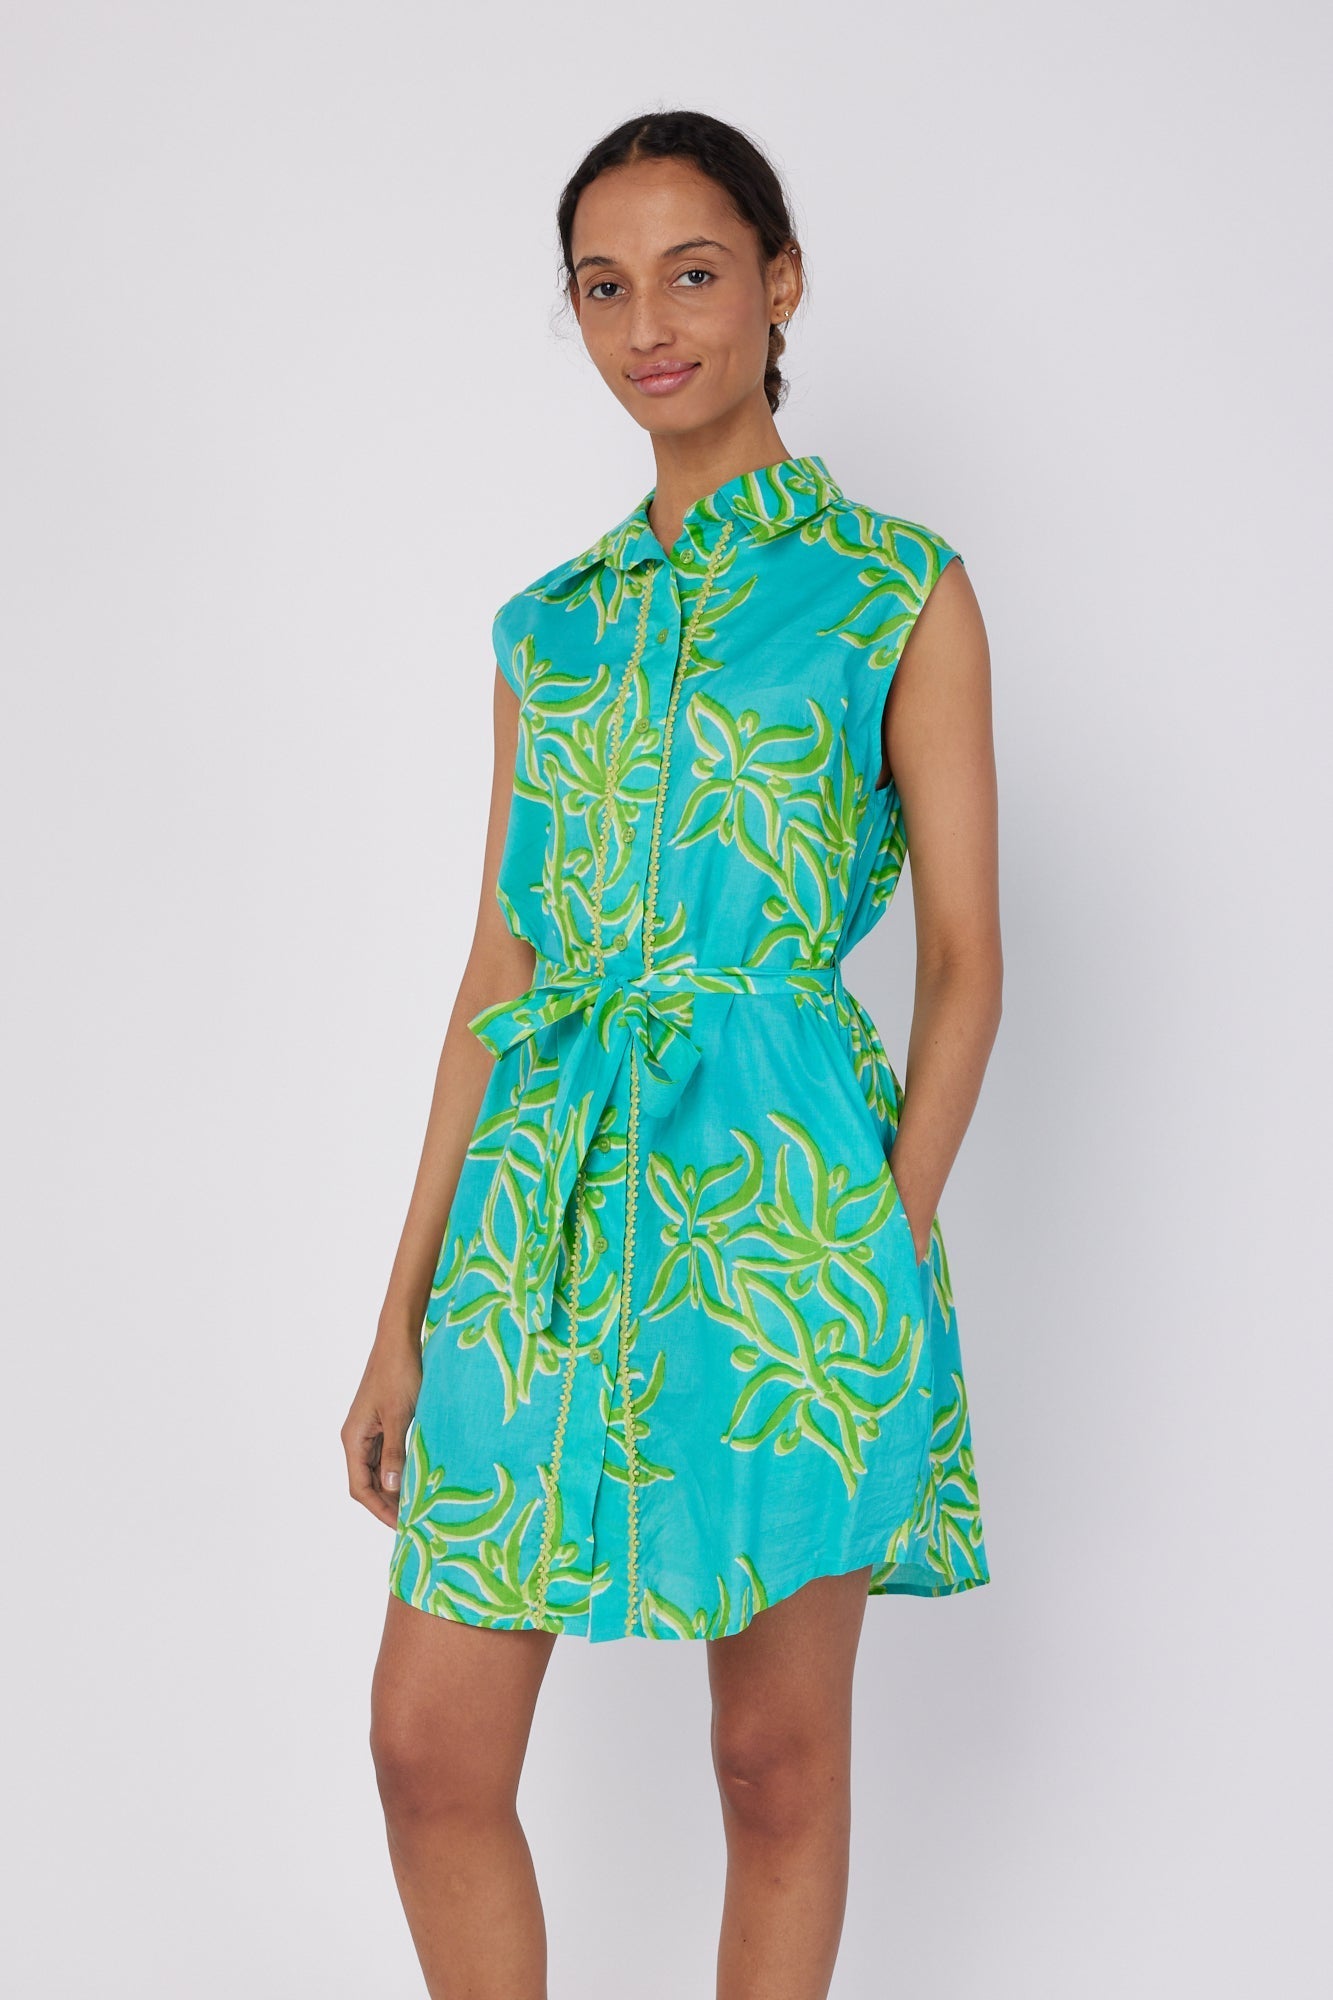 ModaPosa Carlotta Short Sleeve Shirt Dress with Pockets and Detachable Belt in Green Abstract Flower . Discover women's resort dresses and lifestyle clothing inspired by the Mediterranean. Free worldwide shipping available!